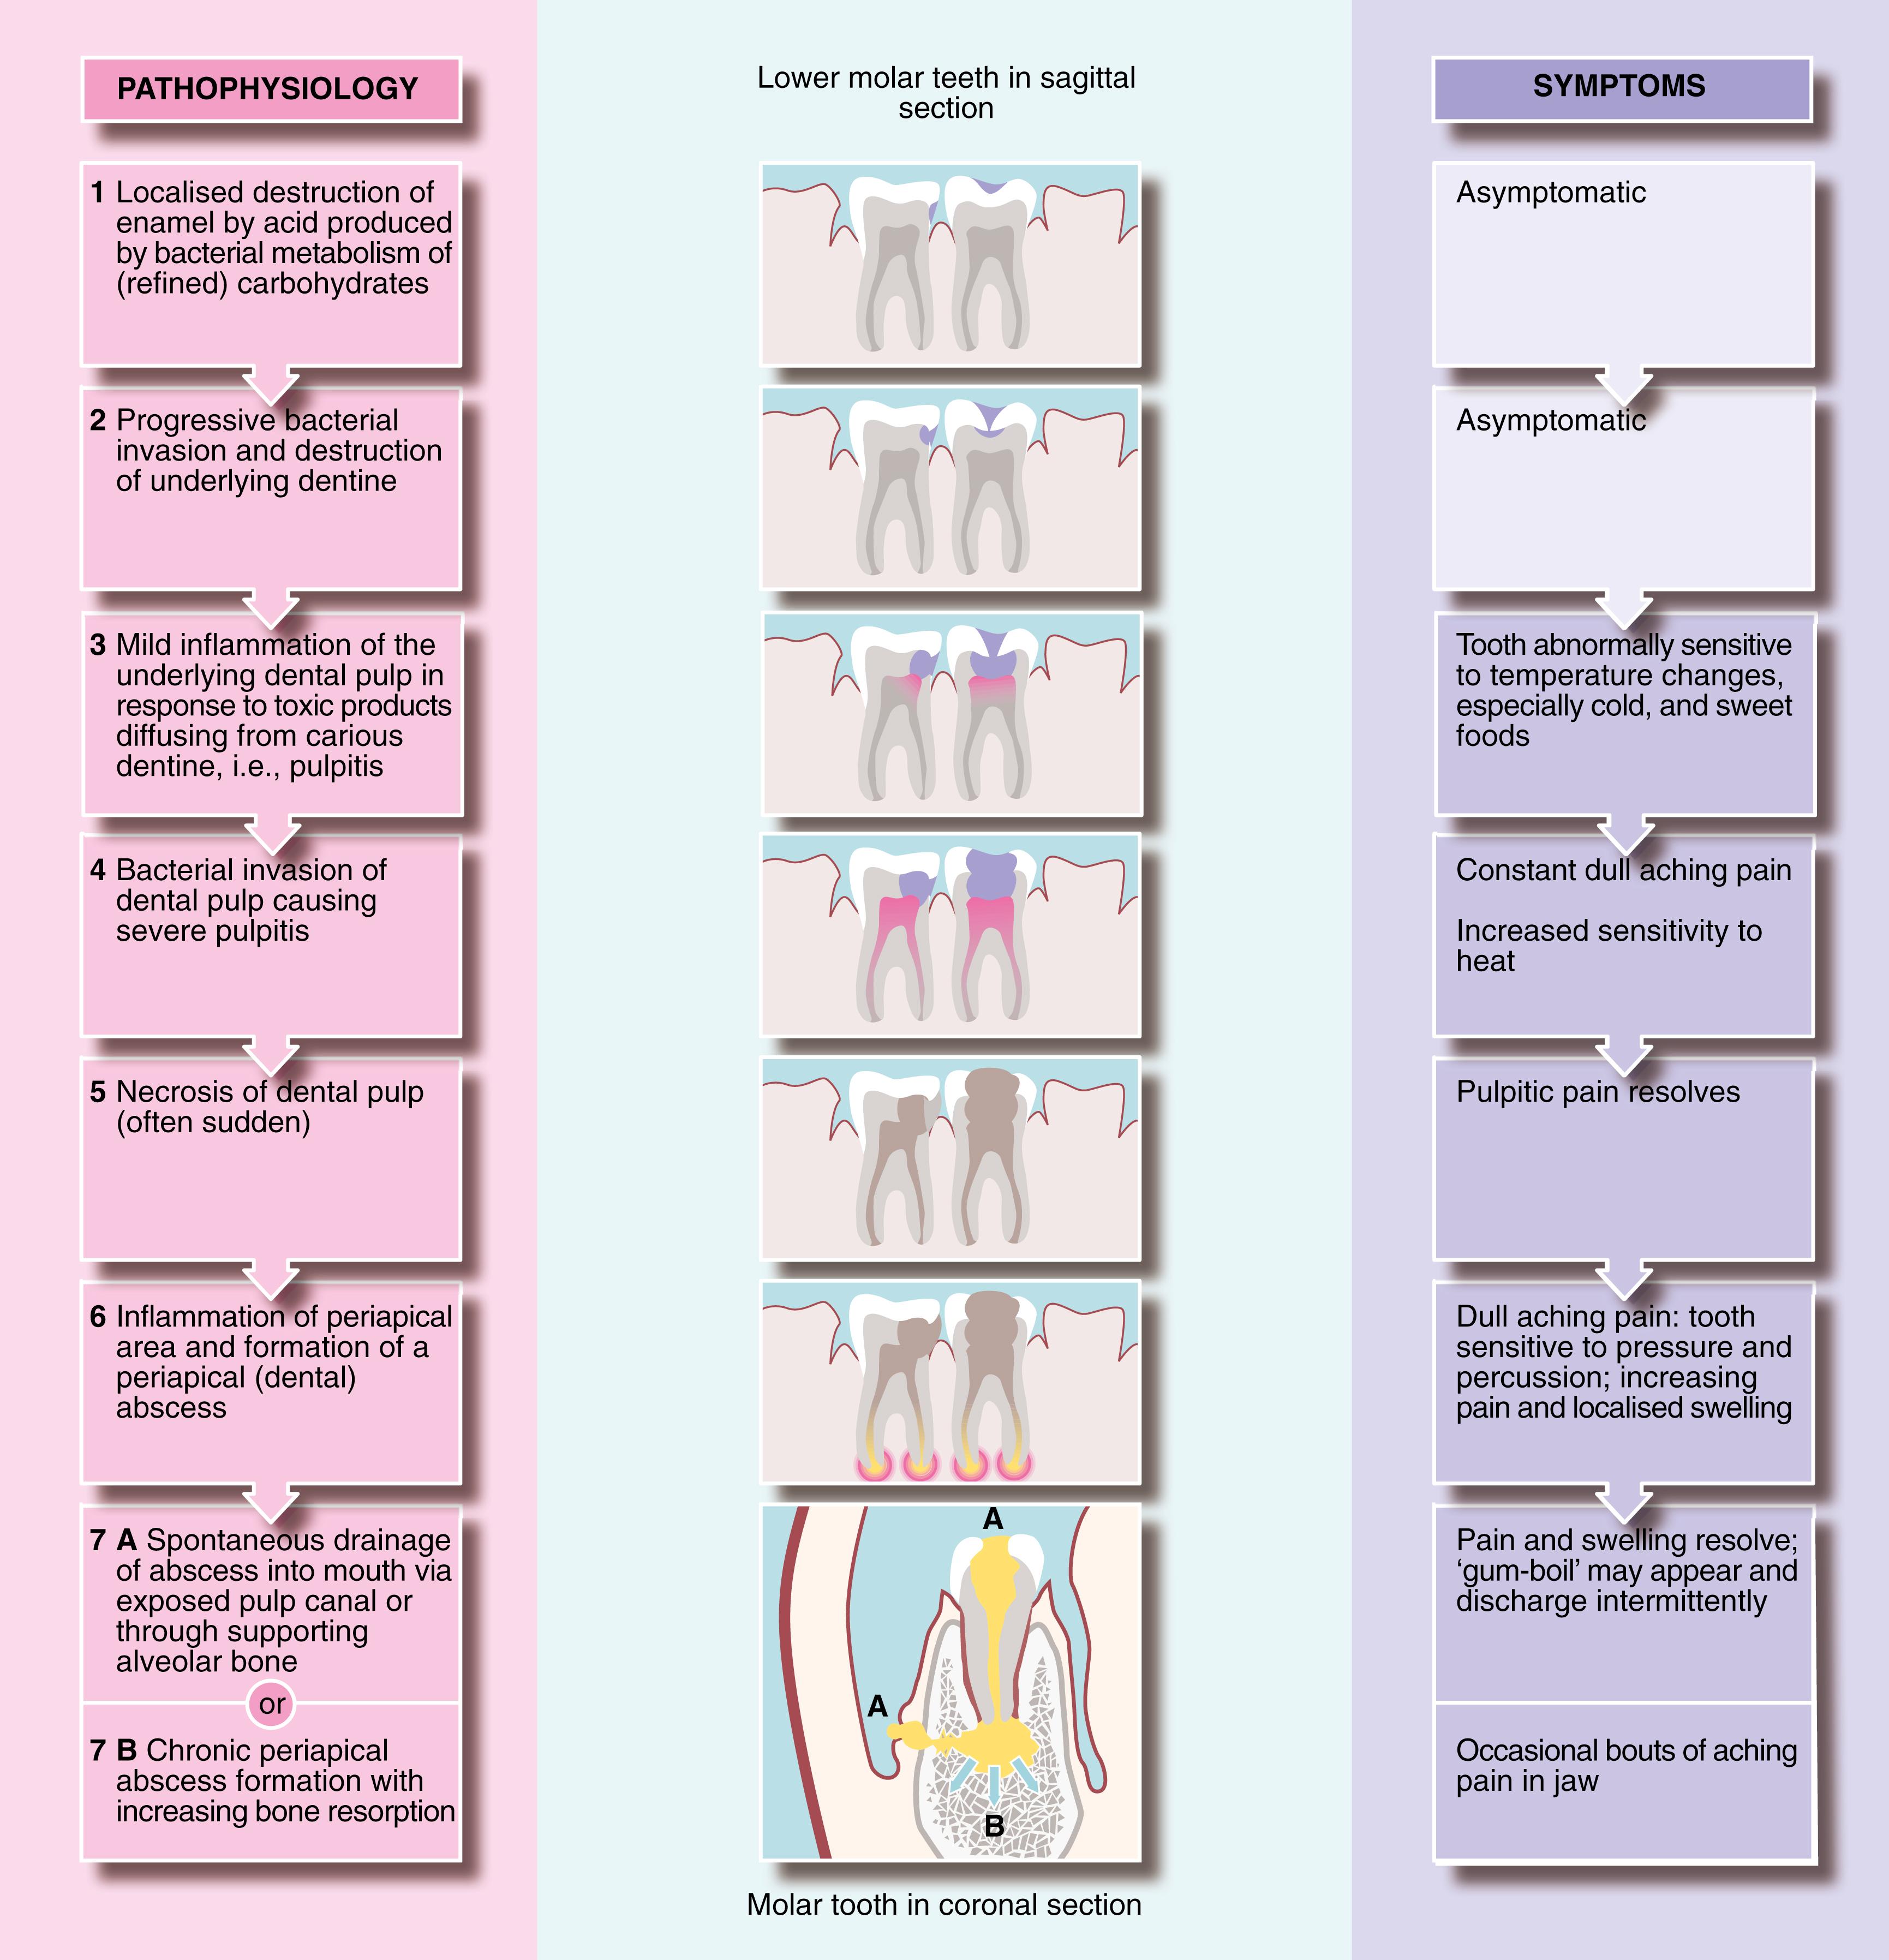 Fig. 48.1, Pathophysiology and Symptoms of Dental Caries and Its Sequelae.